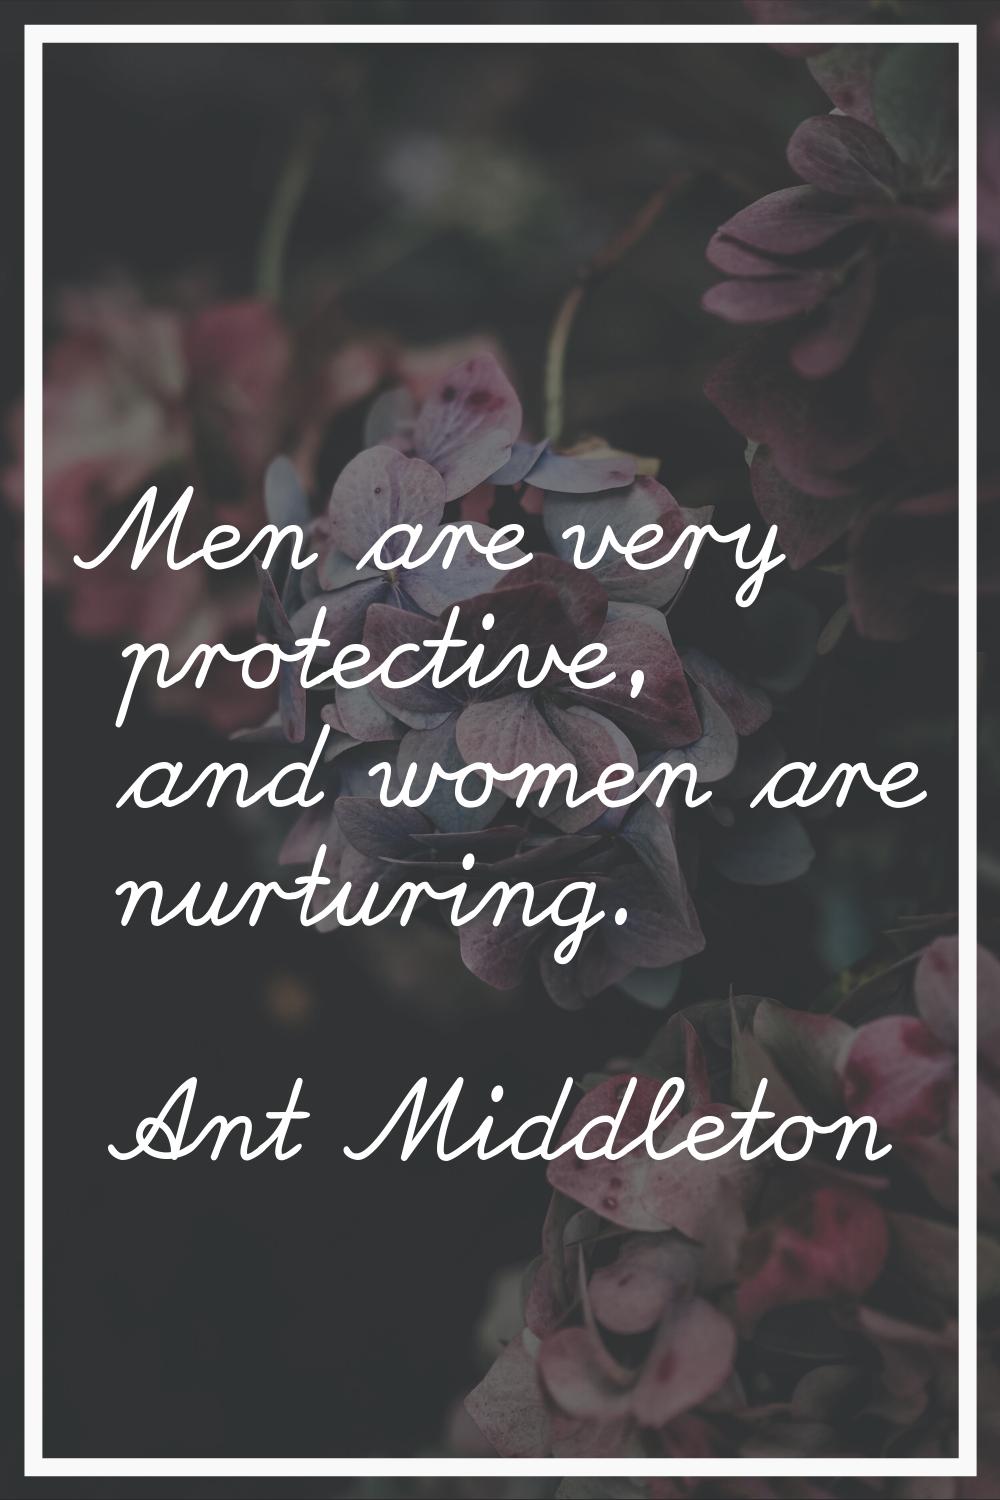 Men are very protective, and women are nurturing.